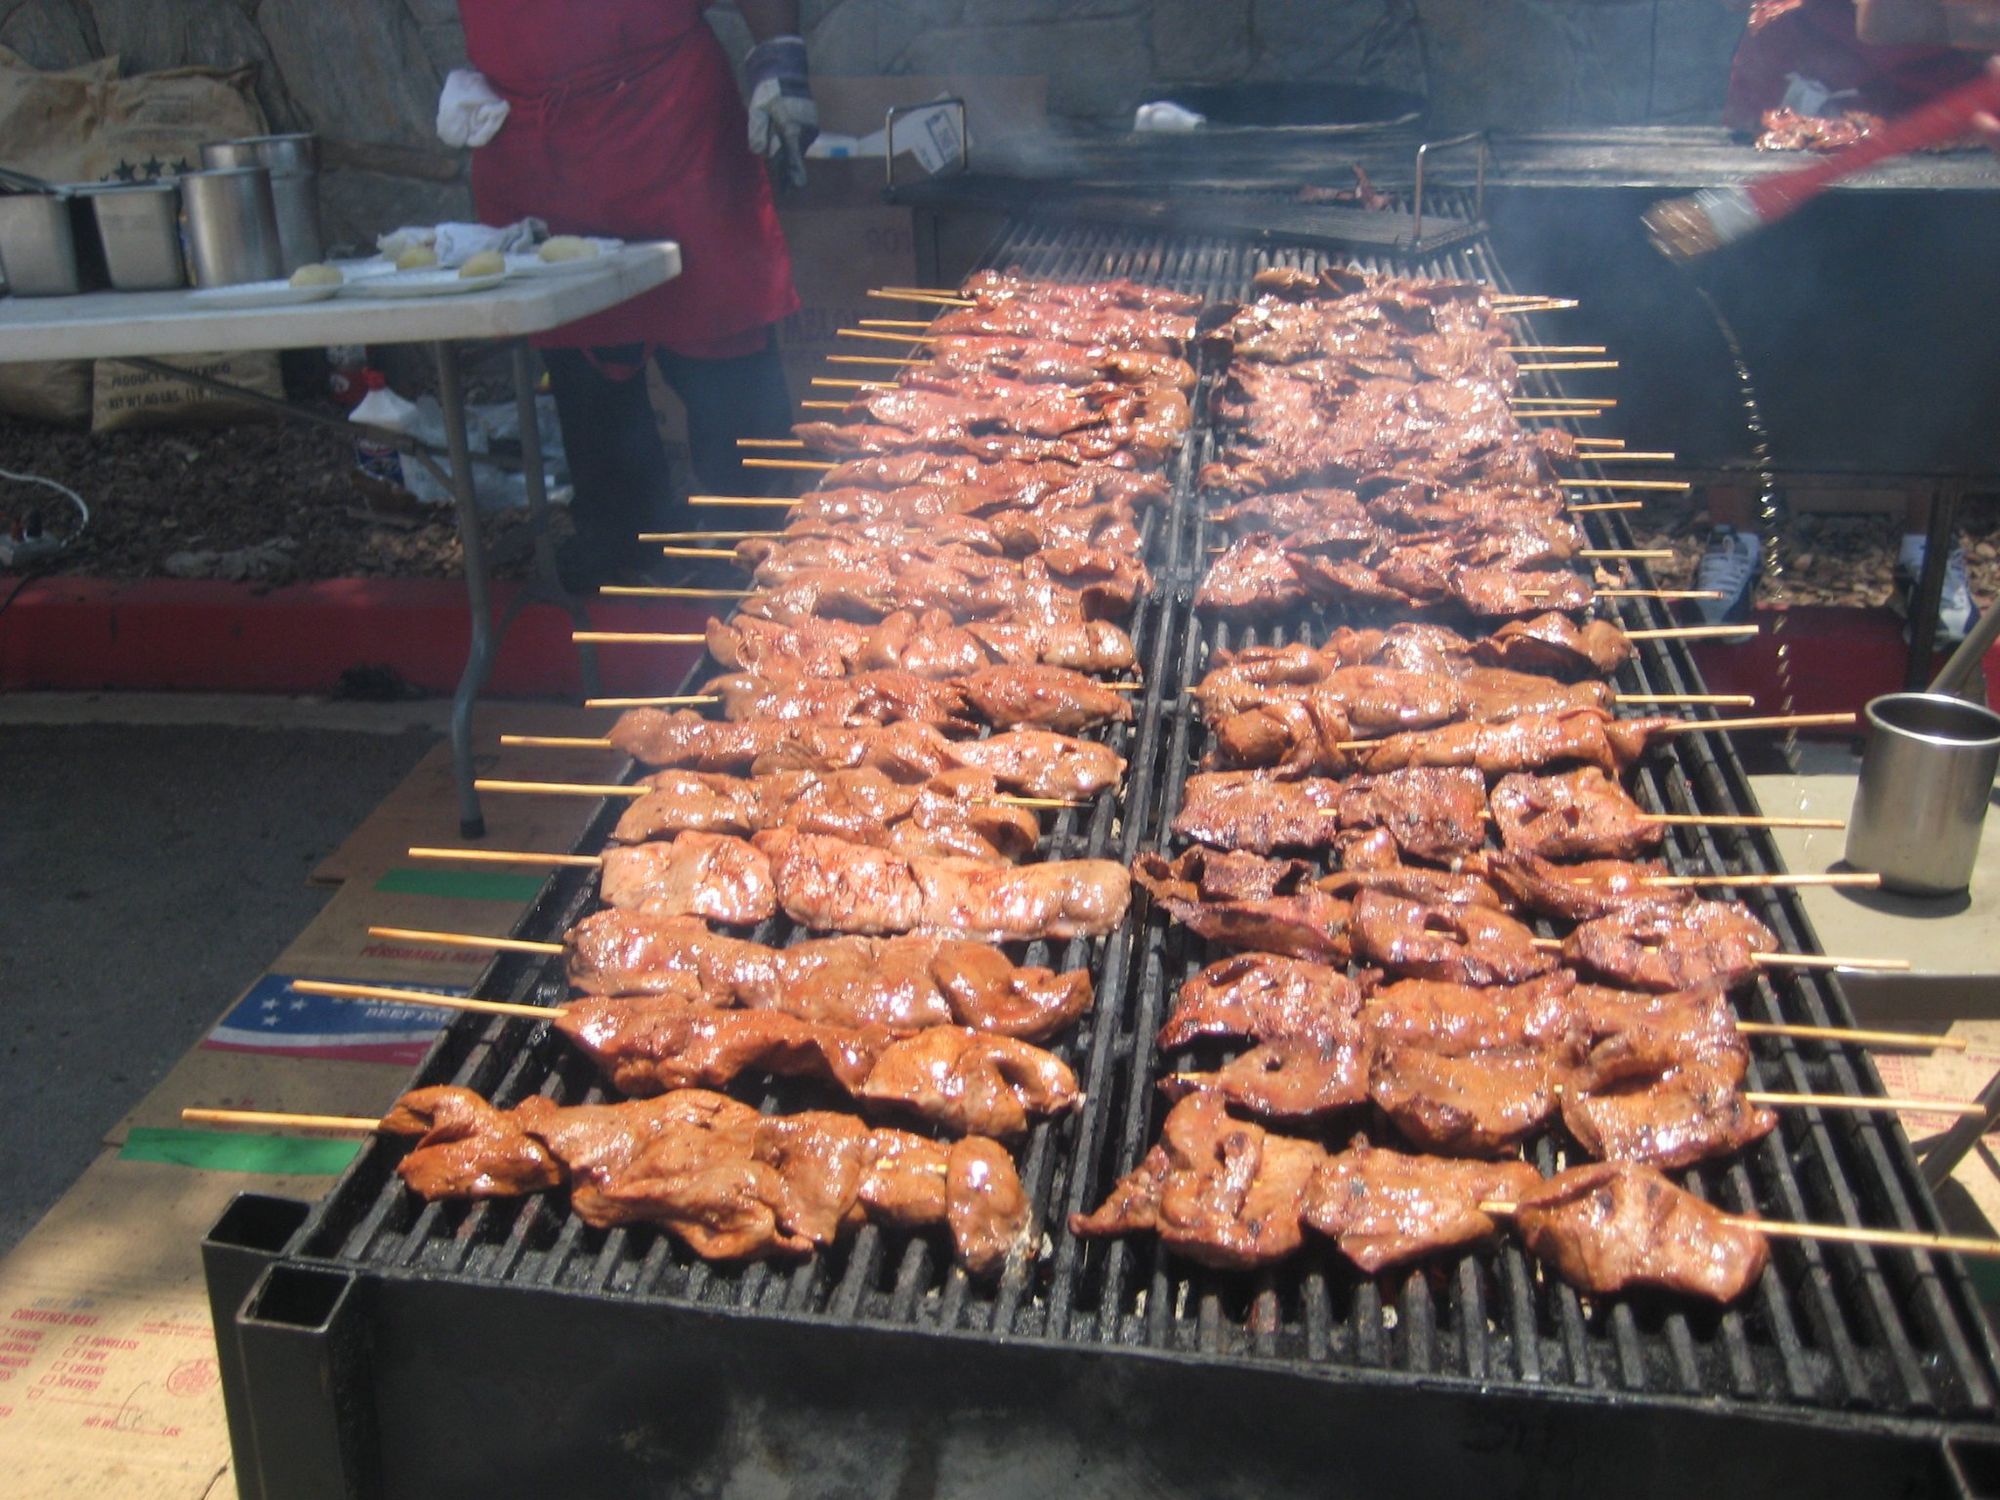 Anticuchos on the grill at the "El Peru Viene a ti" Festival in Los Angeles.